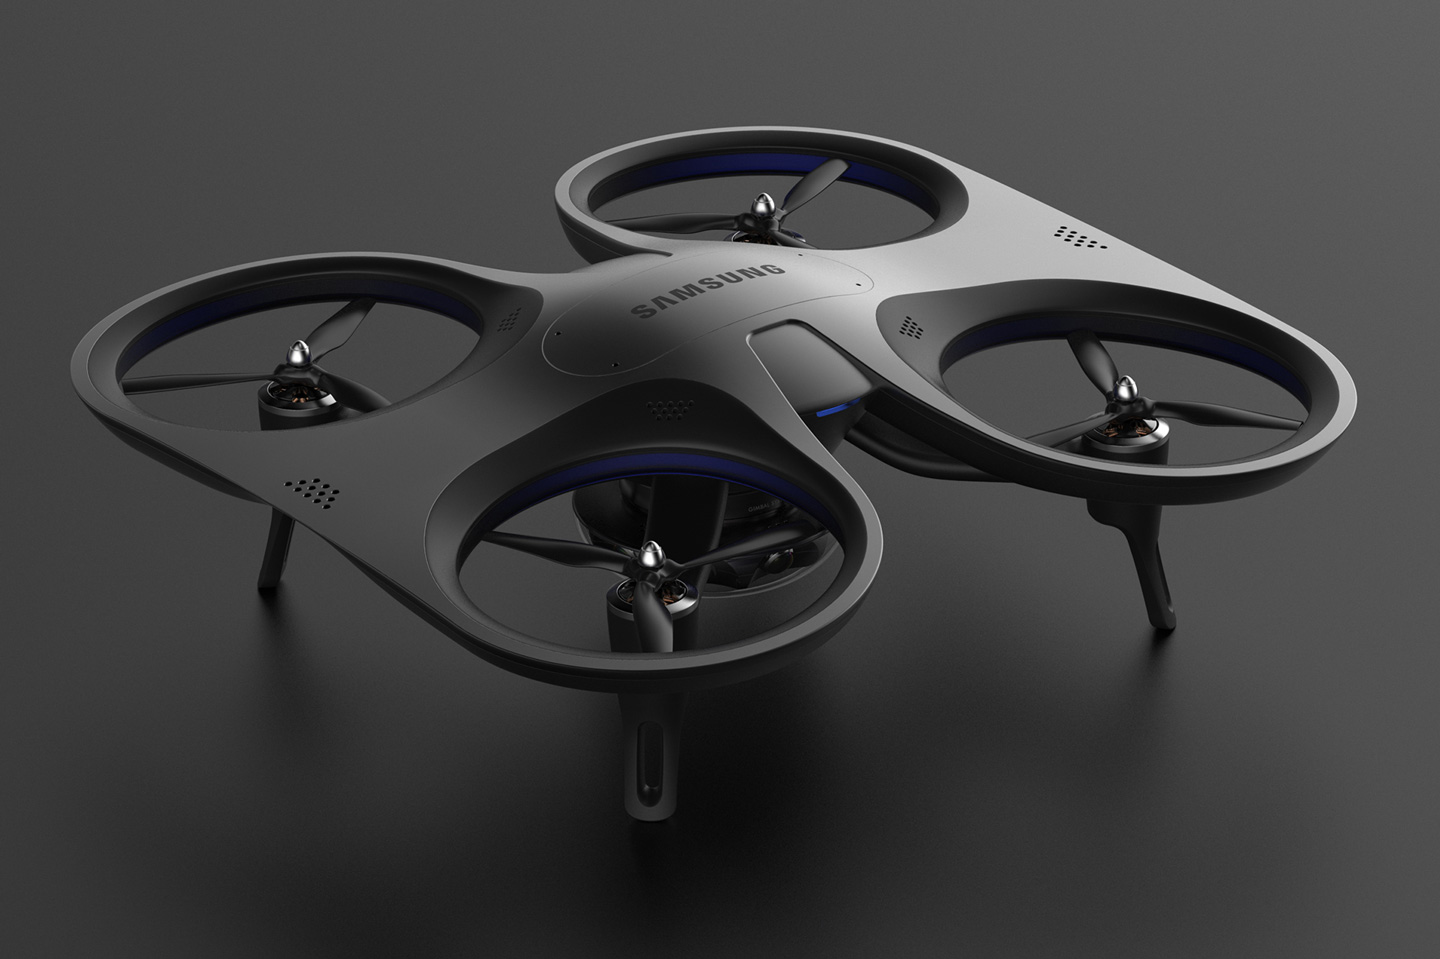 #This Samsung Drone wasn’t designed for consumers… it was designed for public safety